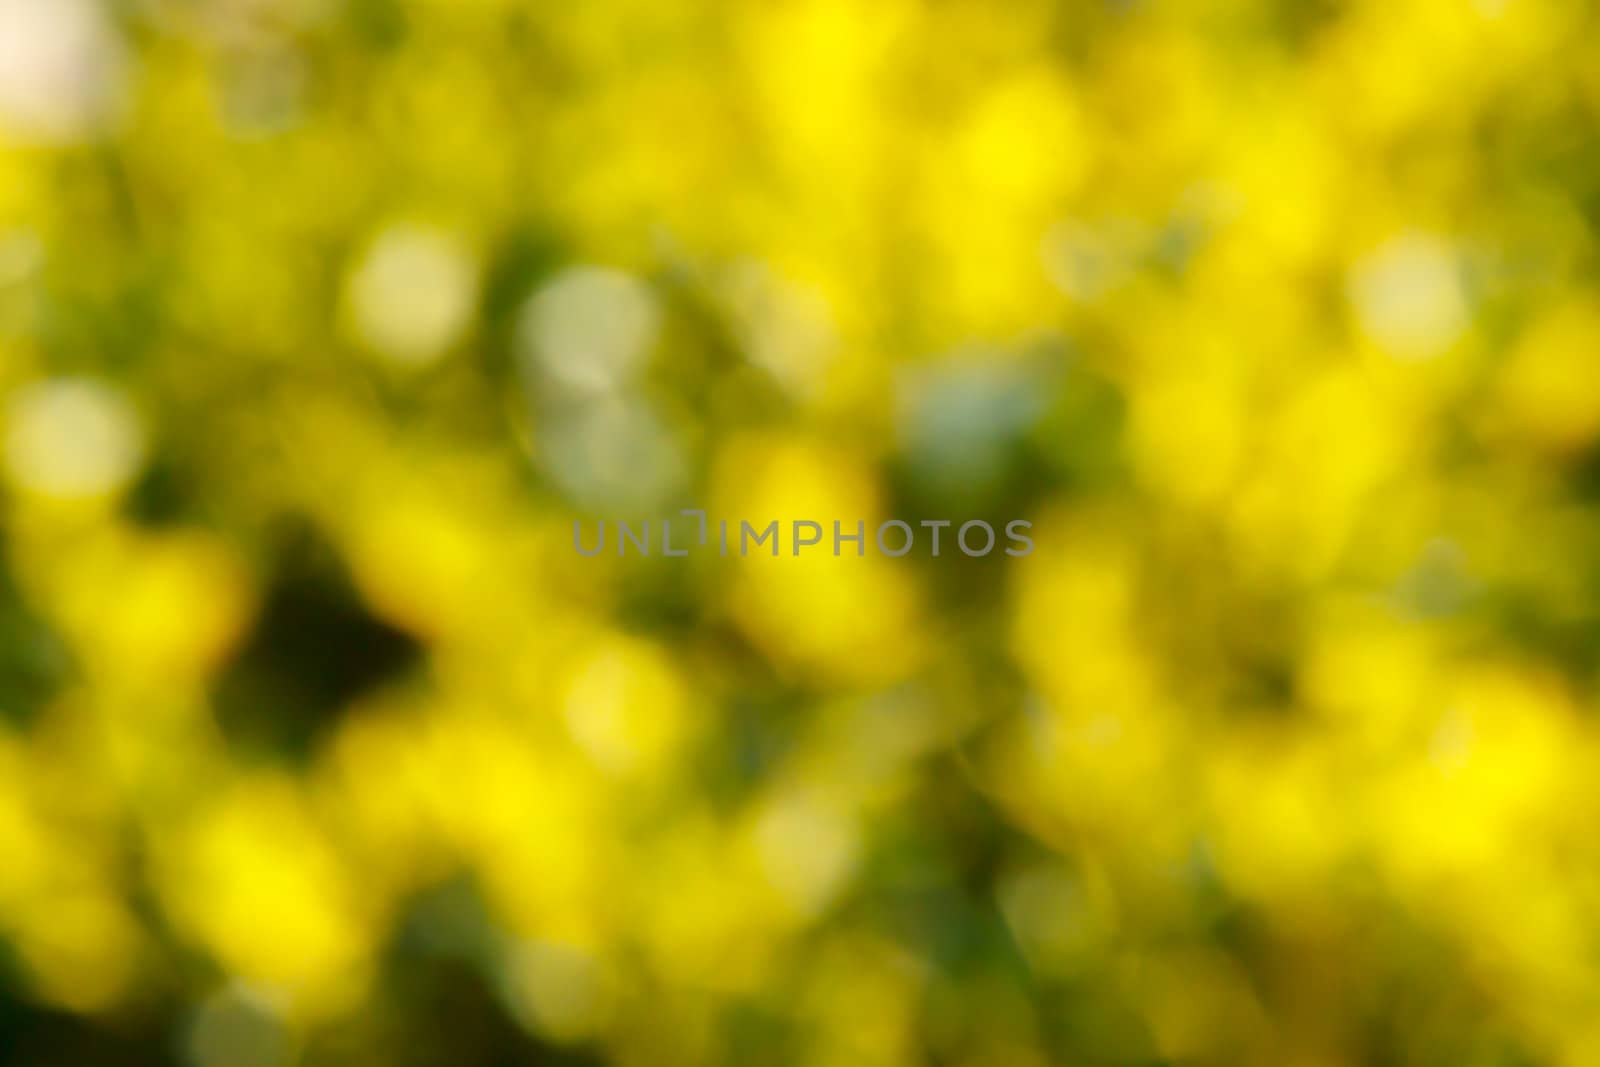 Abstract green and yellow blurred background by artush